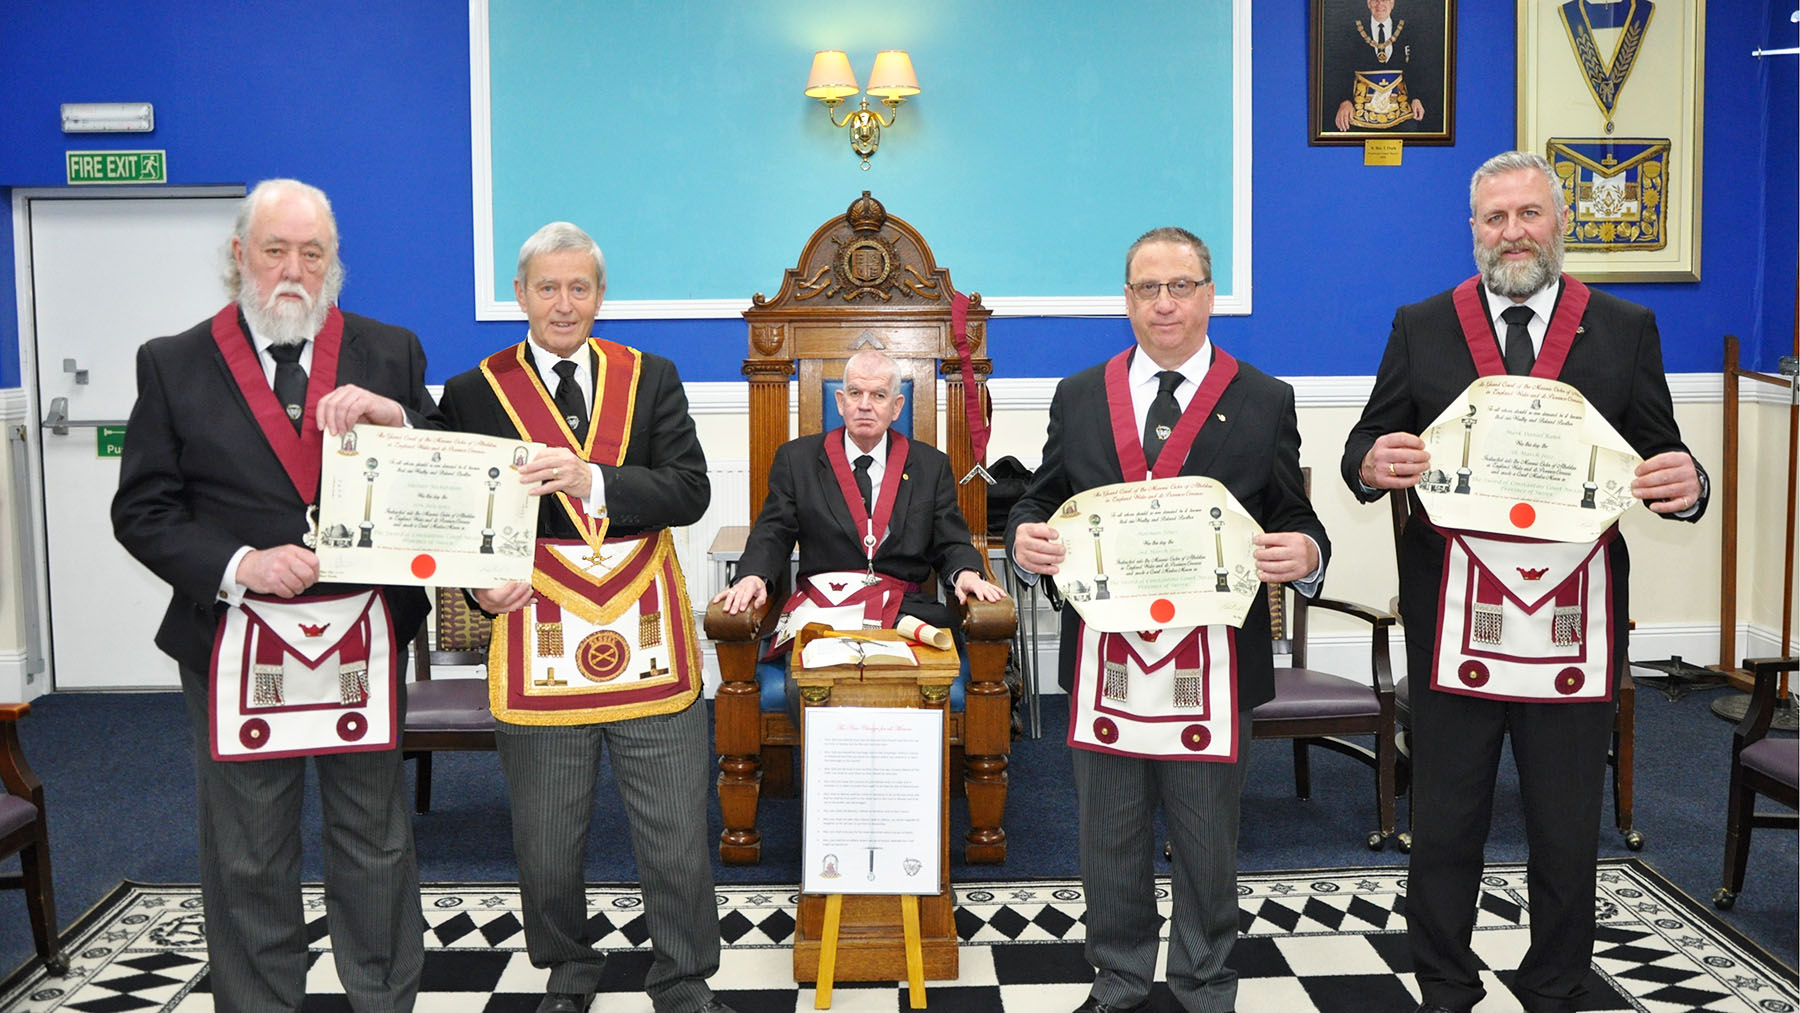 Three Grand Court Certificates at Sword of Constantine Court